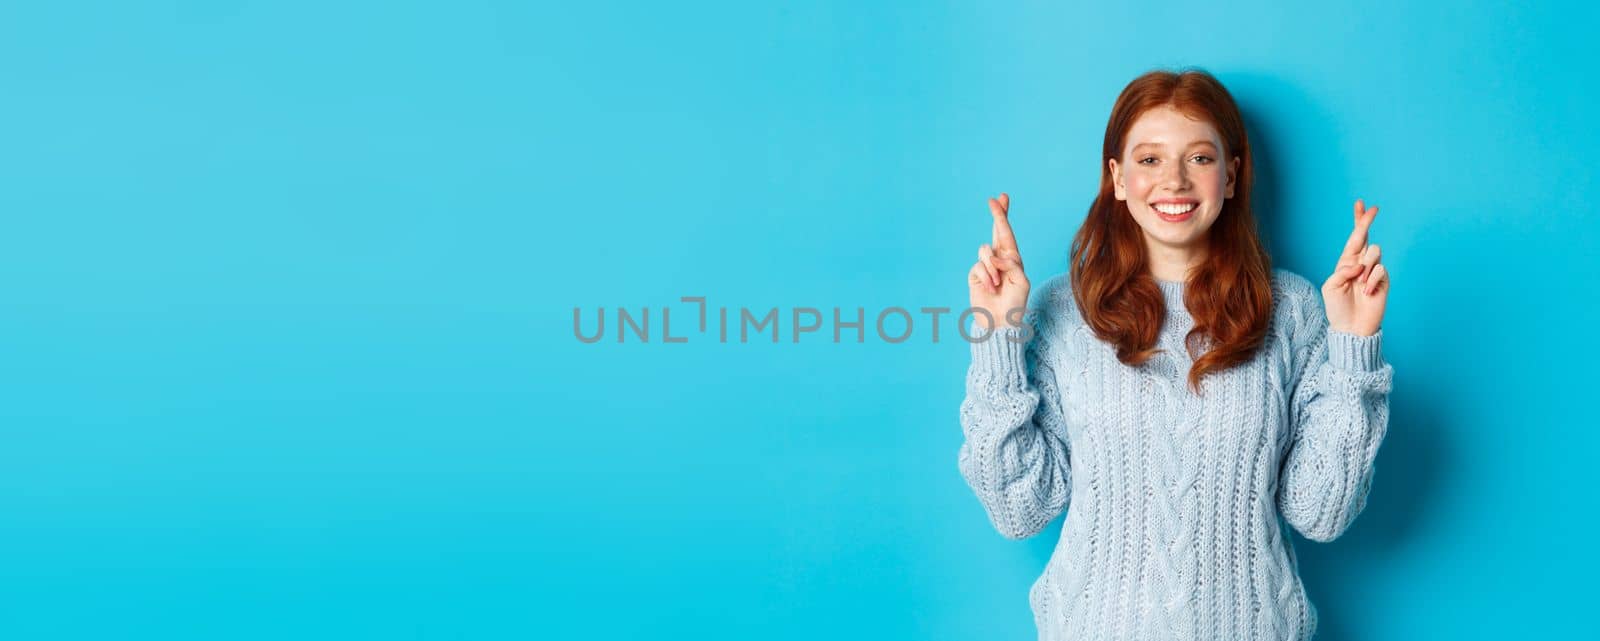 Hopeful redhead girl making a wish, cross fingers for good luck, smiling and anticipating good news or positive result, standing against blue background.